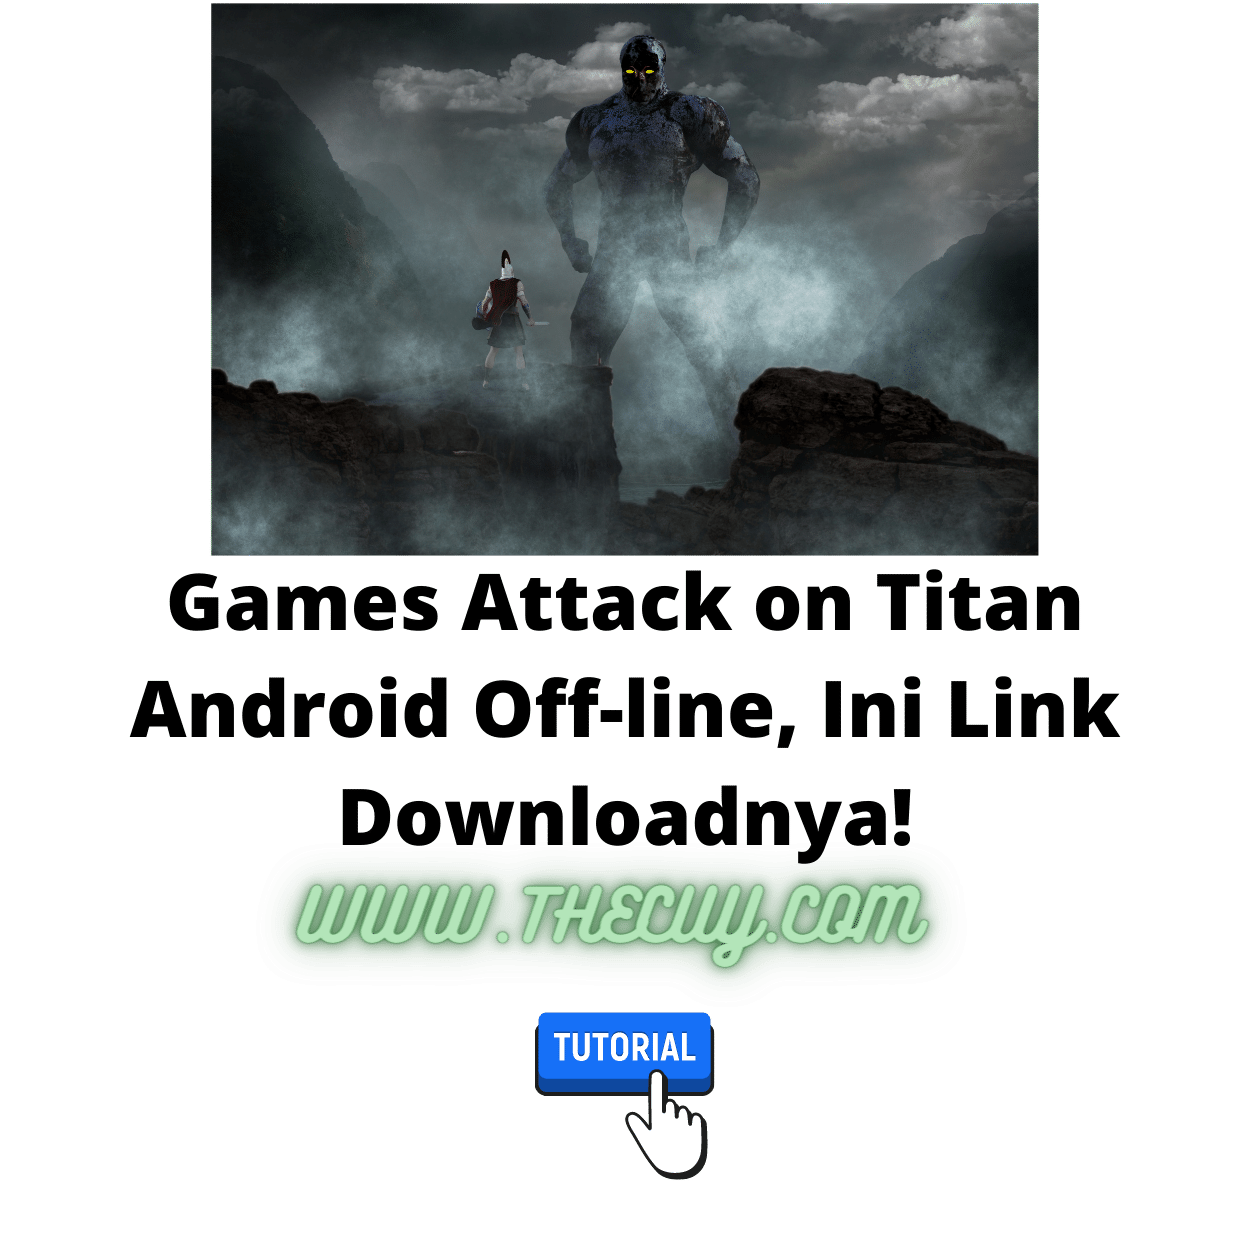 Games Attack on Titan Android Off-line, Ini Link Downloadnya!